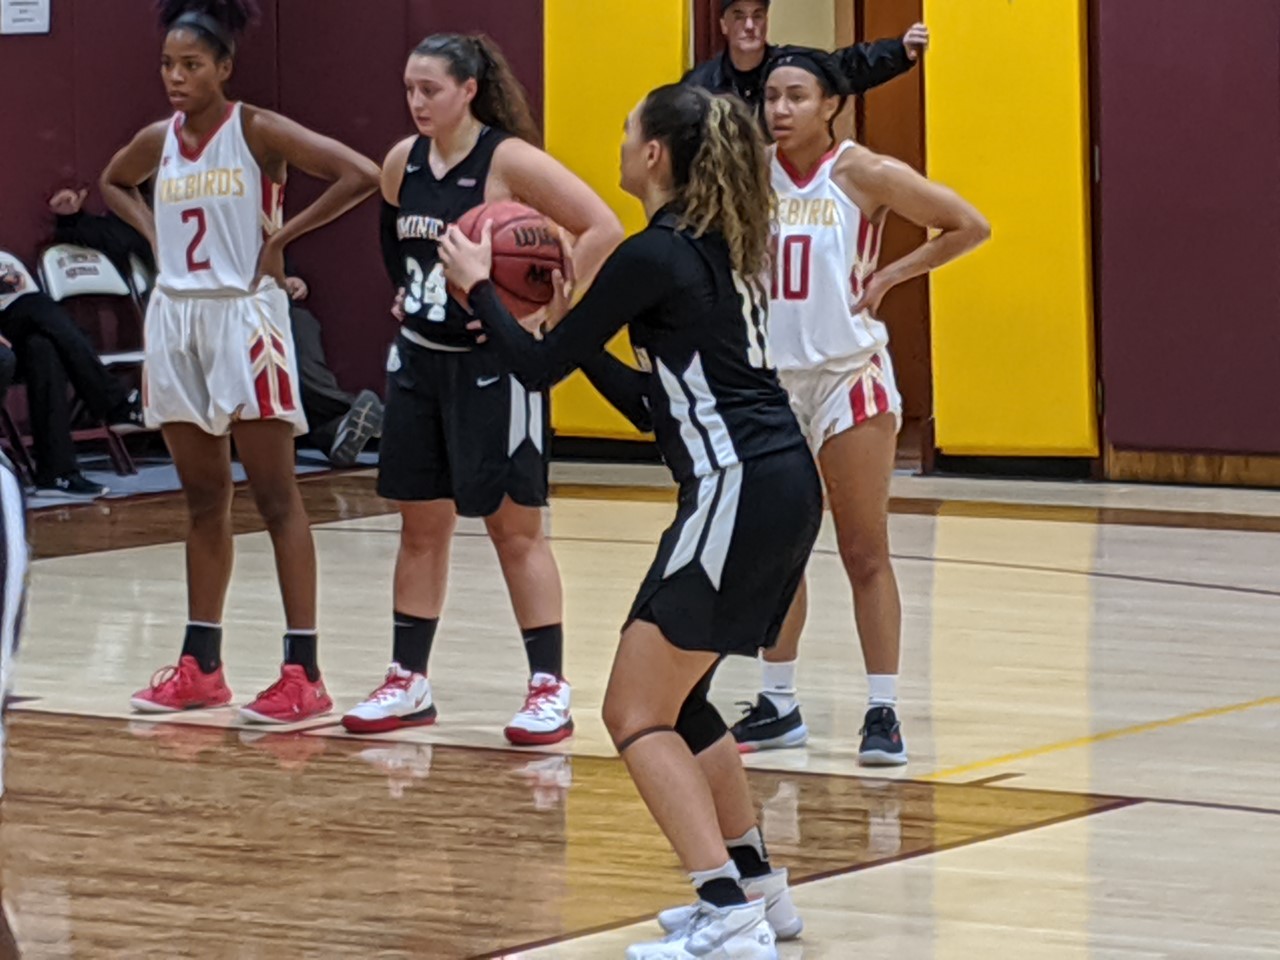 GUERRA LEADS LADY CHARGERS TO VICTORY OVER FIREBIRDS